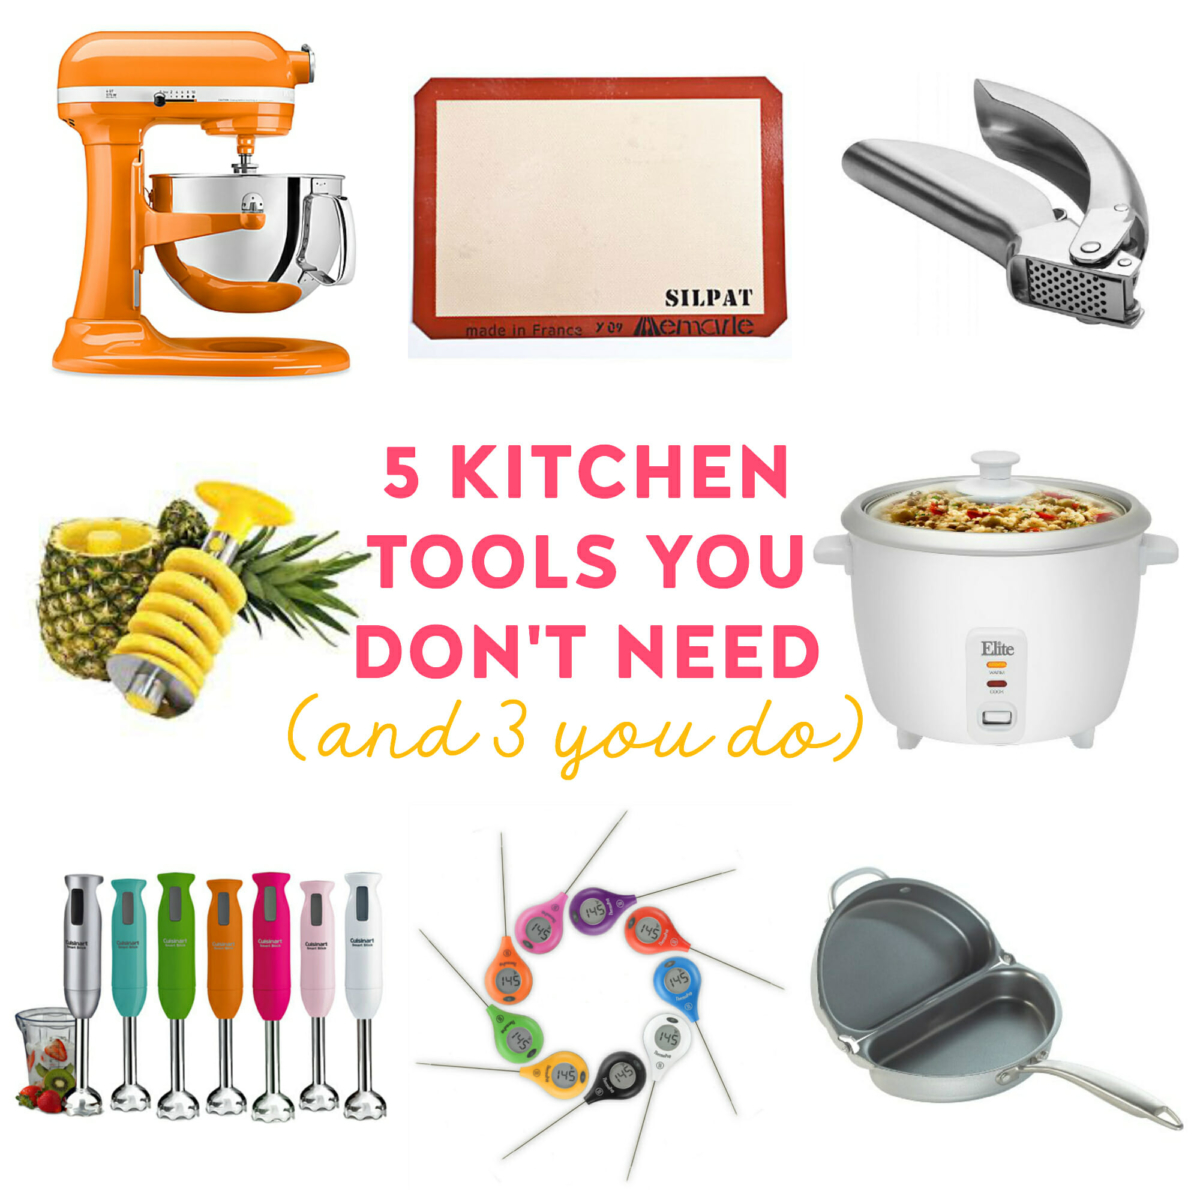 5 Kitchen Gadgets You Don't Need (and 3 You Do!)